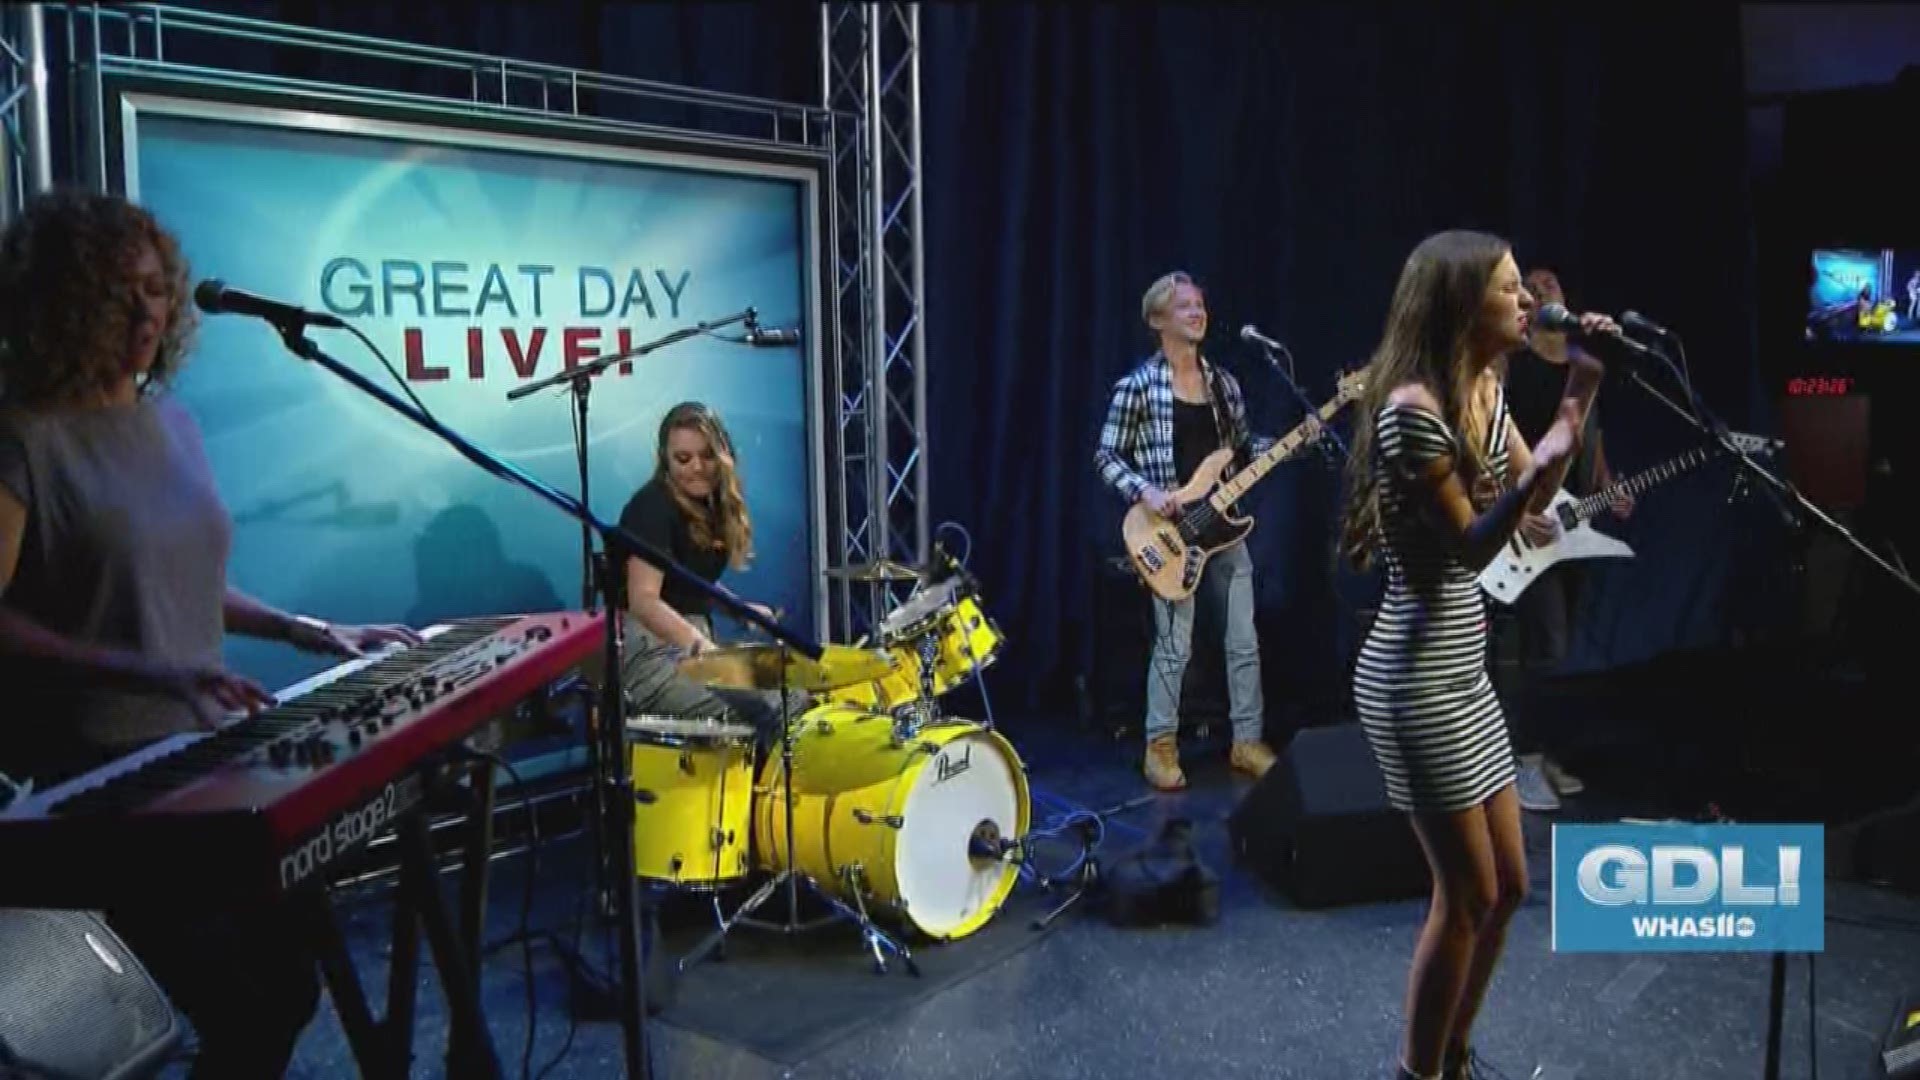 The band The Roux stopped by Great Day Live before singer Ella Unruh takes part in The Celebration of Music concert on Sunday, August 18, 2019 from 7-9 PM at the Kentucky Science Center.